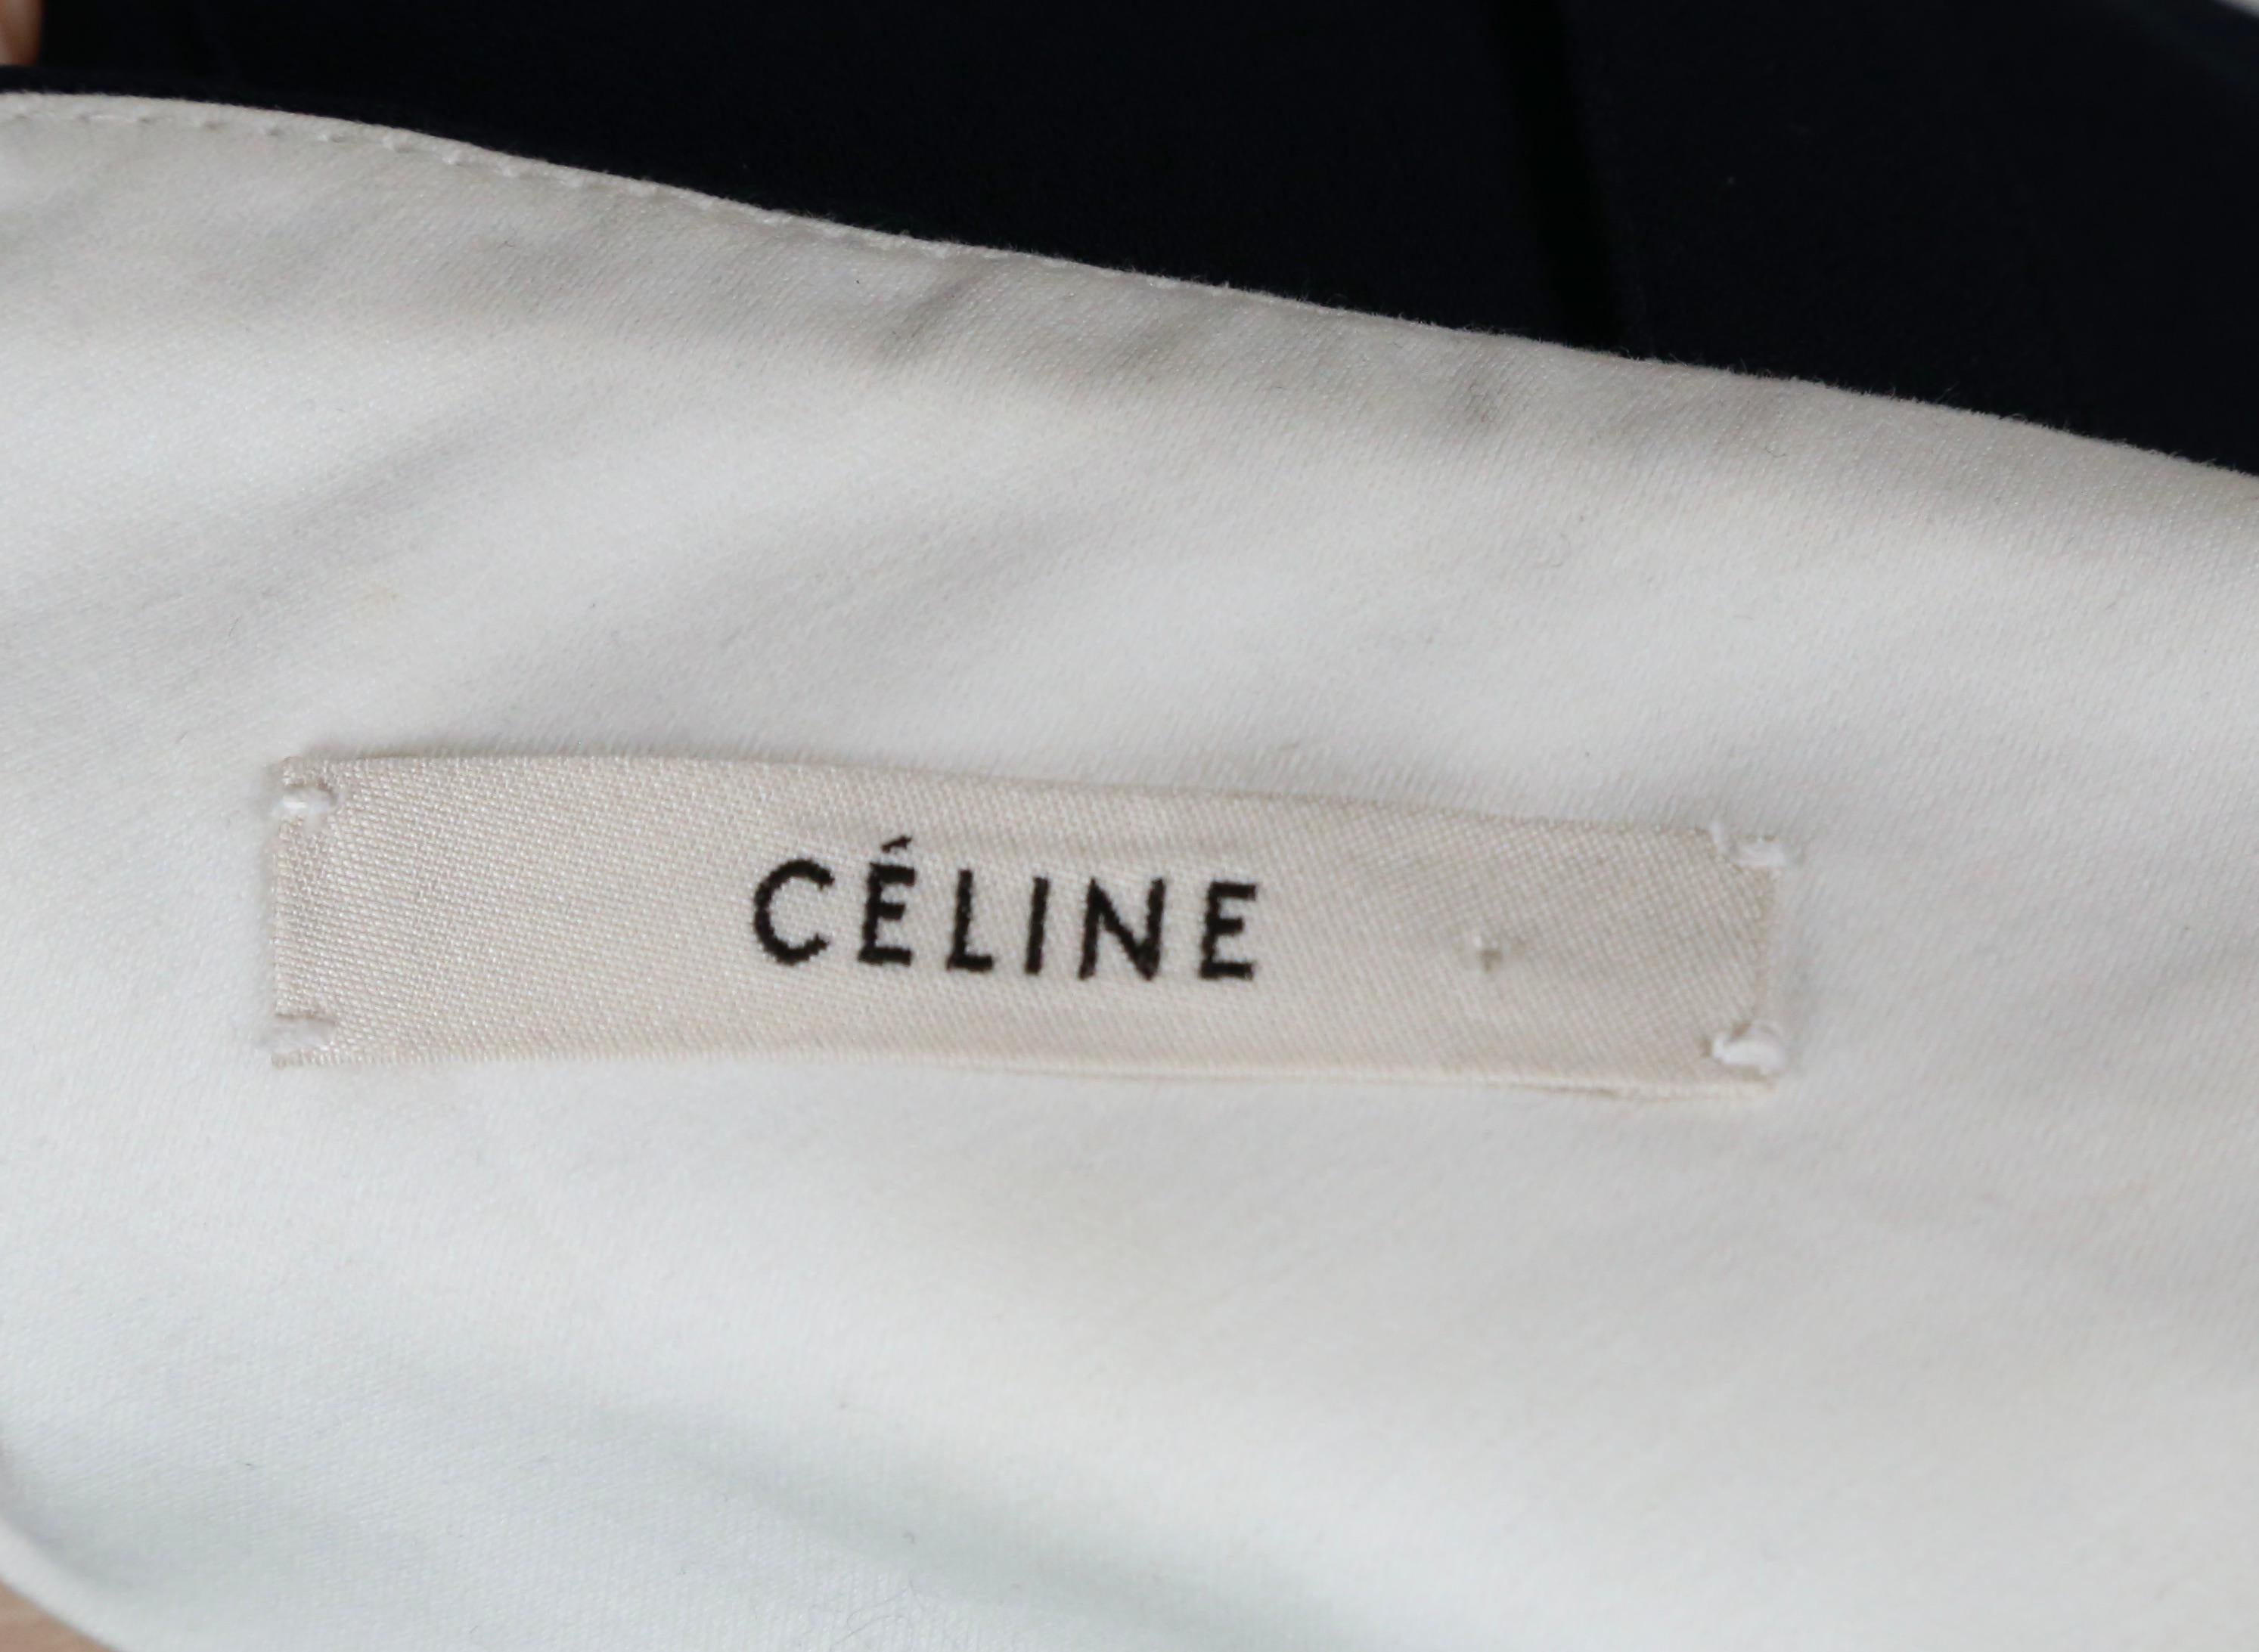 CELINE by PHOEBE PHILO navy blue pants with wide belt and contrast topstitching 2